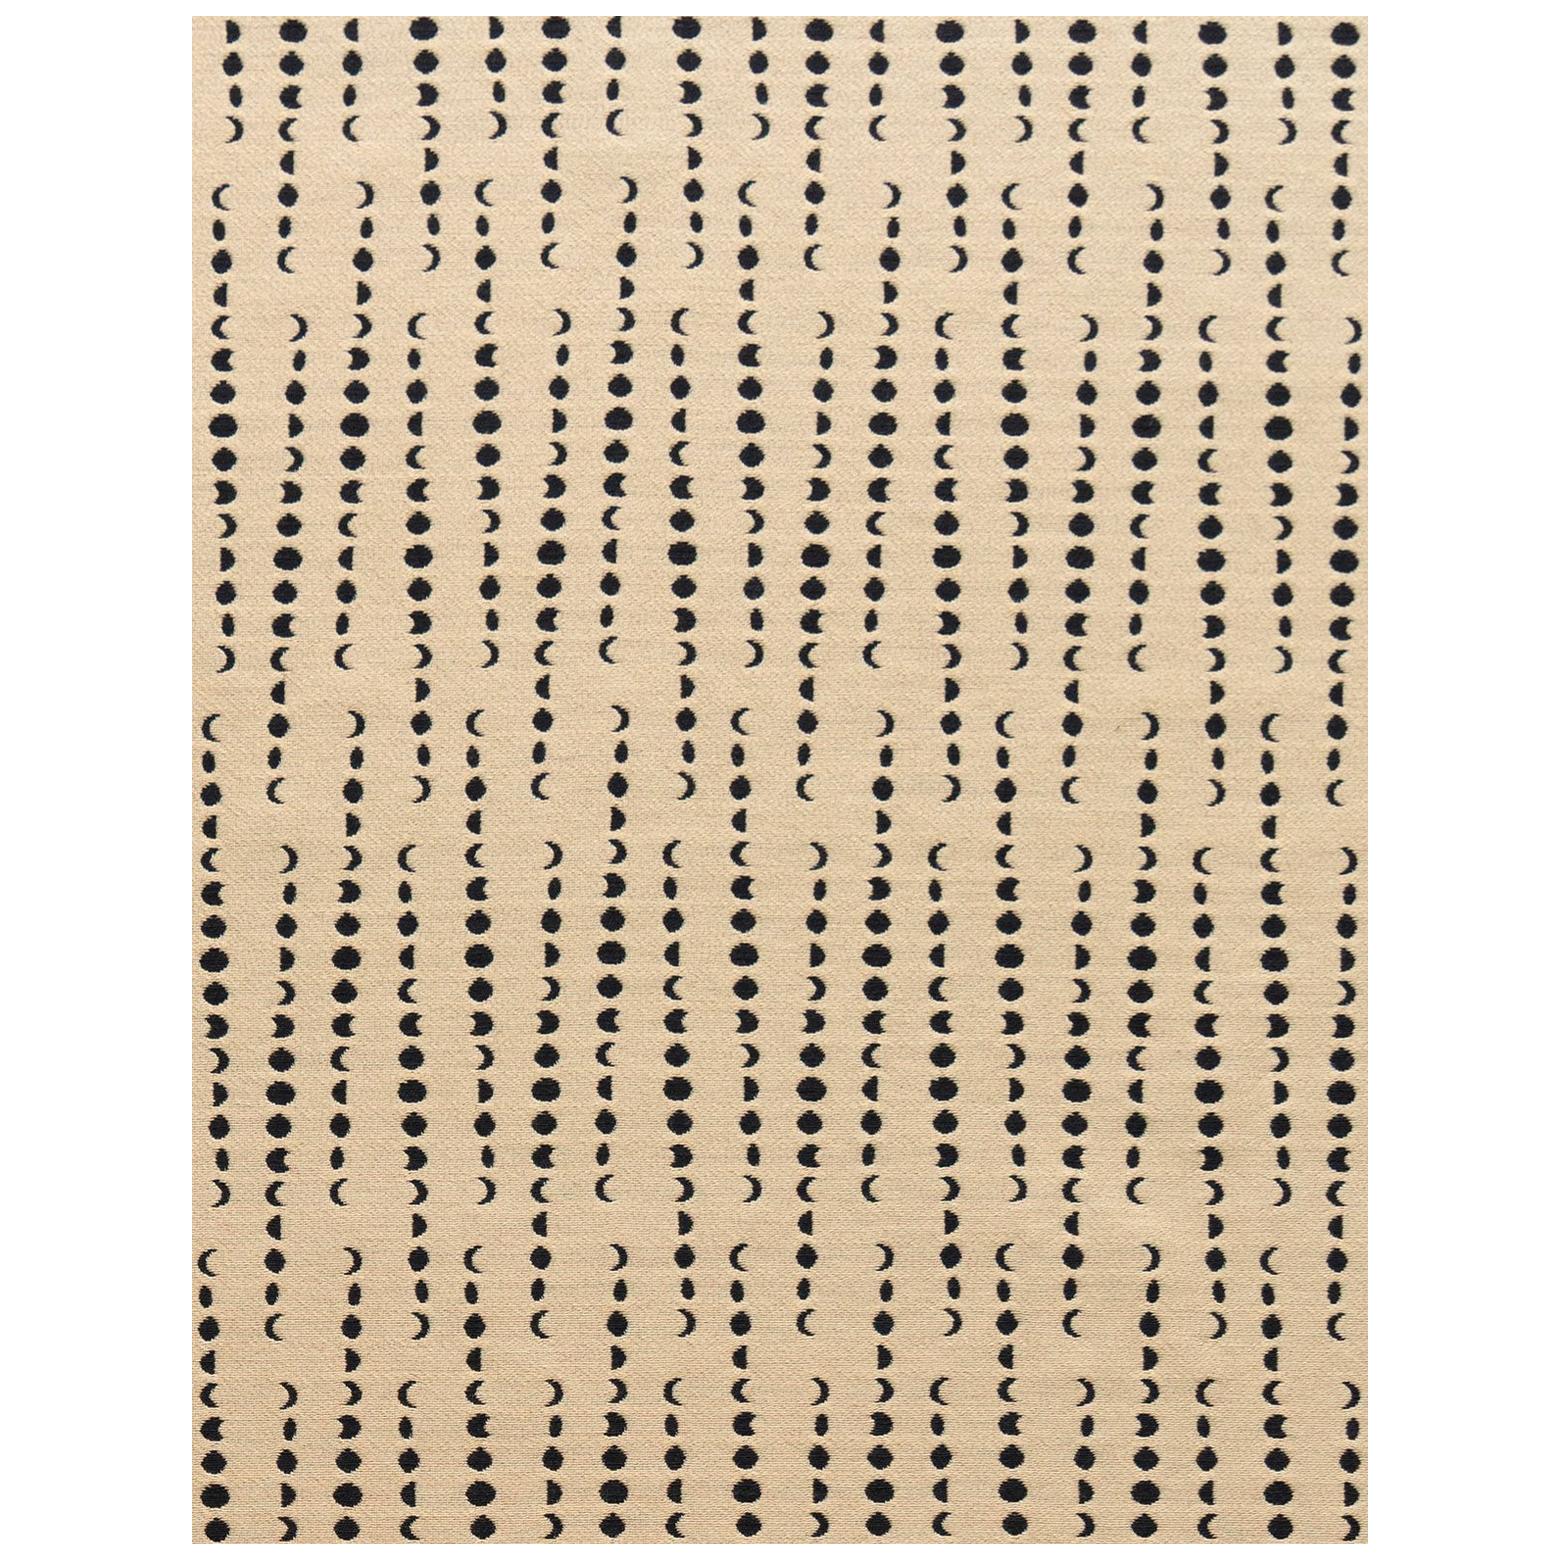 Earthlight Moon Woven Commercial Grade Fabric in Leo, Beige and Black For Sale